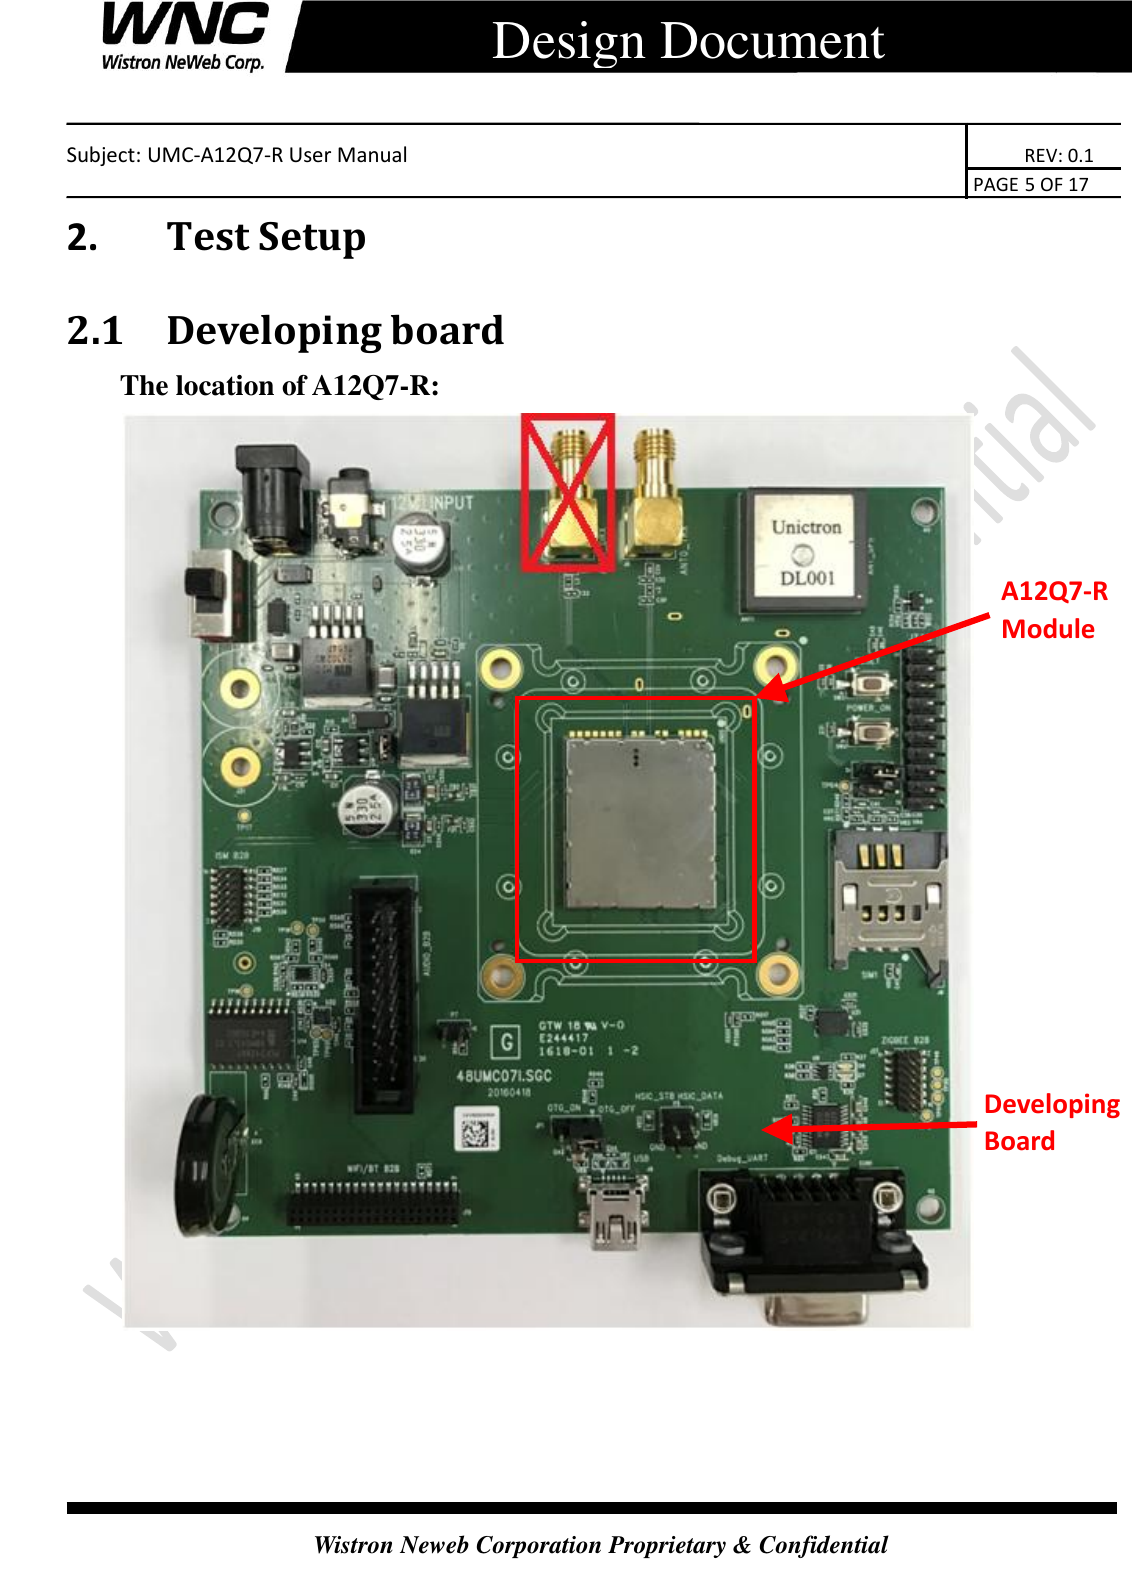    Subject: UMC-A12Q7-R User Manual                                                                      REV: 0.1                                                                                        PAGE 5 OF 17  Wistron Neweb Corporation Proprietary &amp; Confidential      Design Document 2.       Test Setup 2.1 Developing board The location of A12Q7-R:      A12Q7-R Module Developing Board 